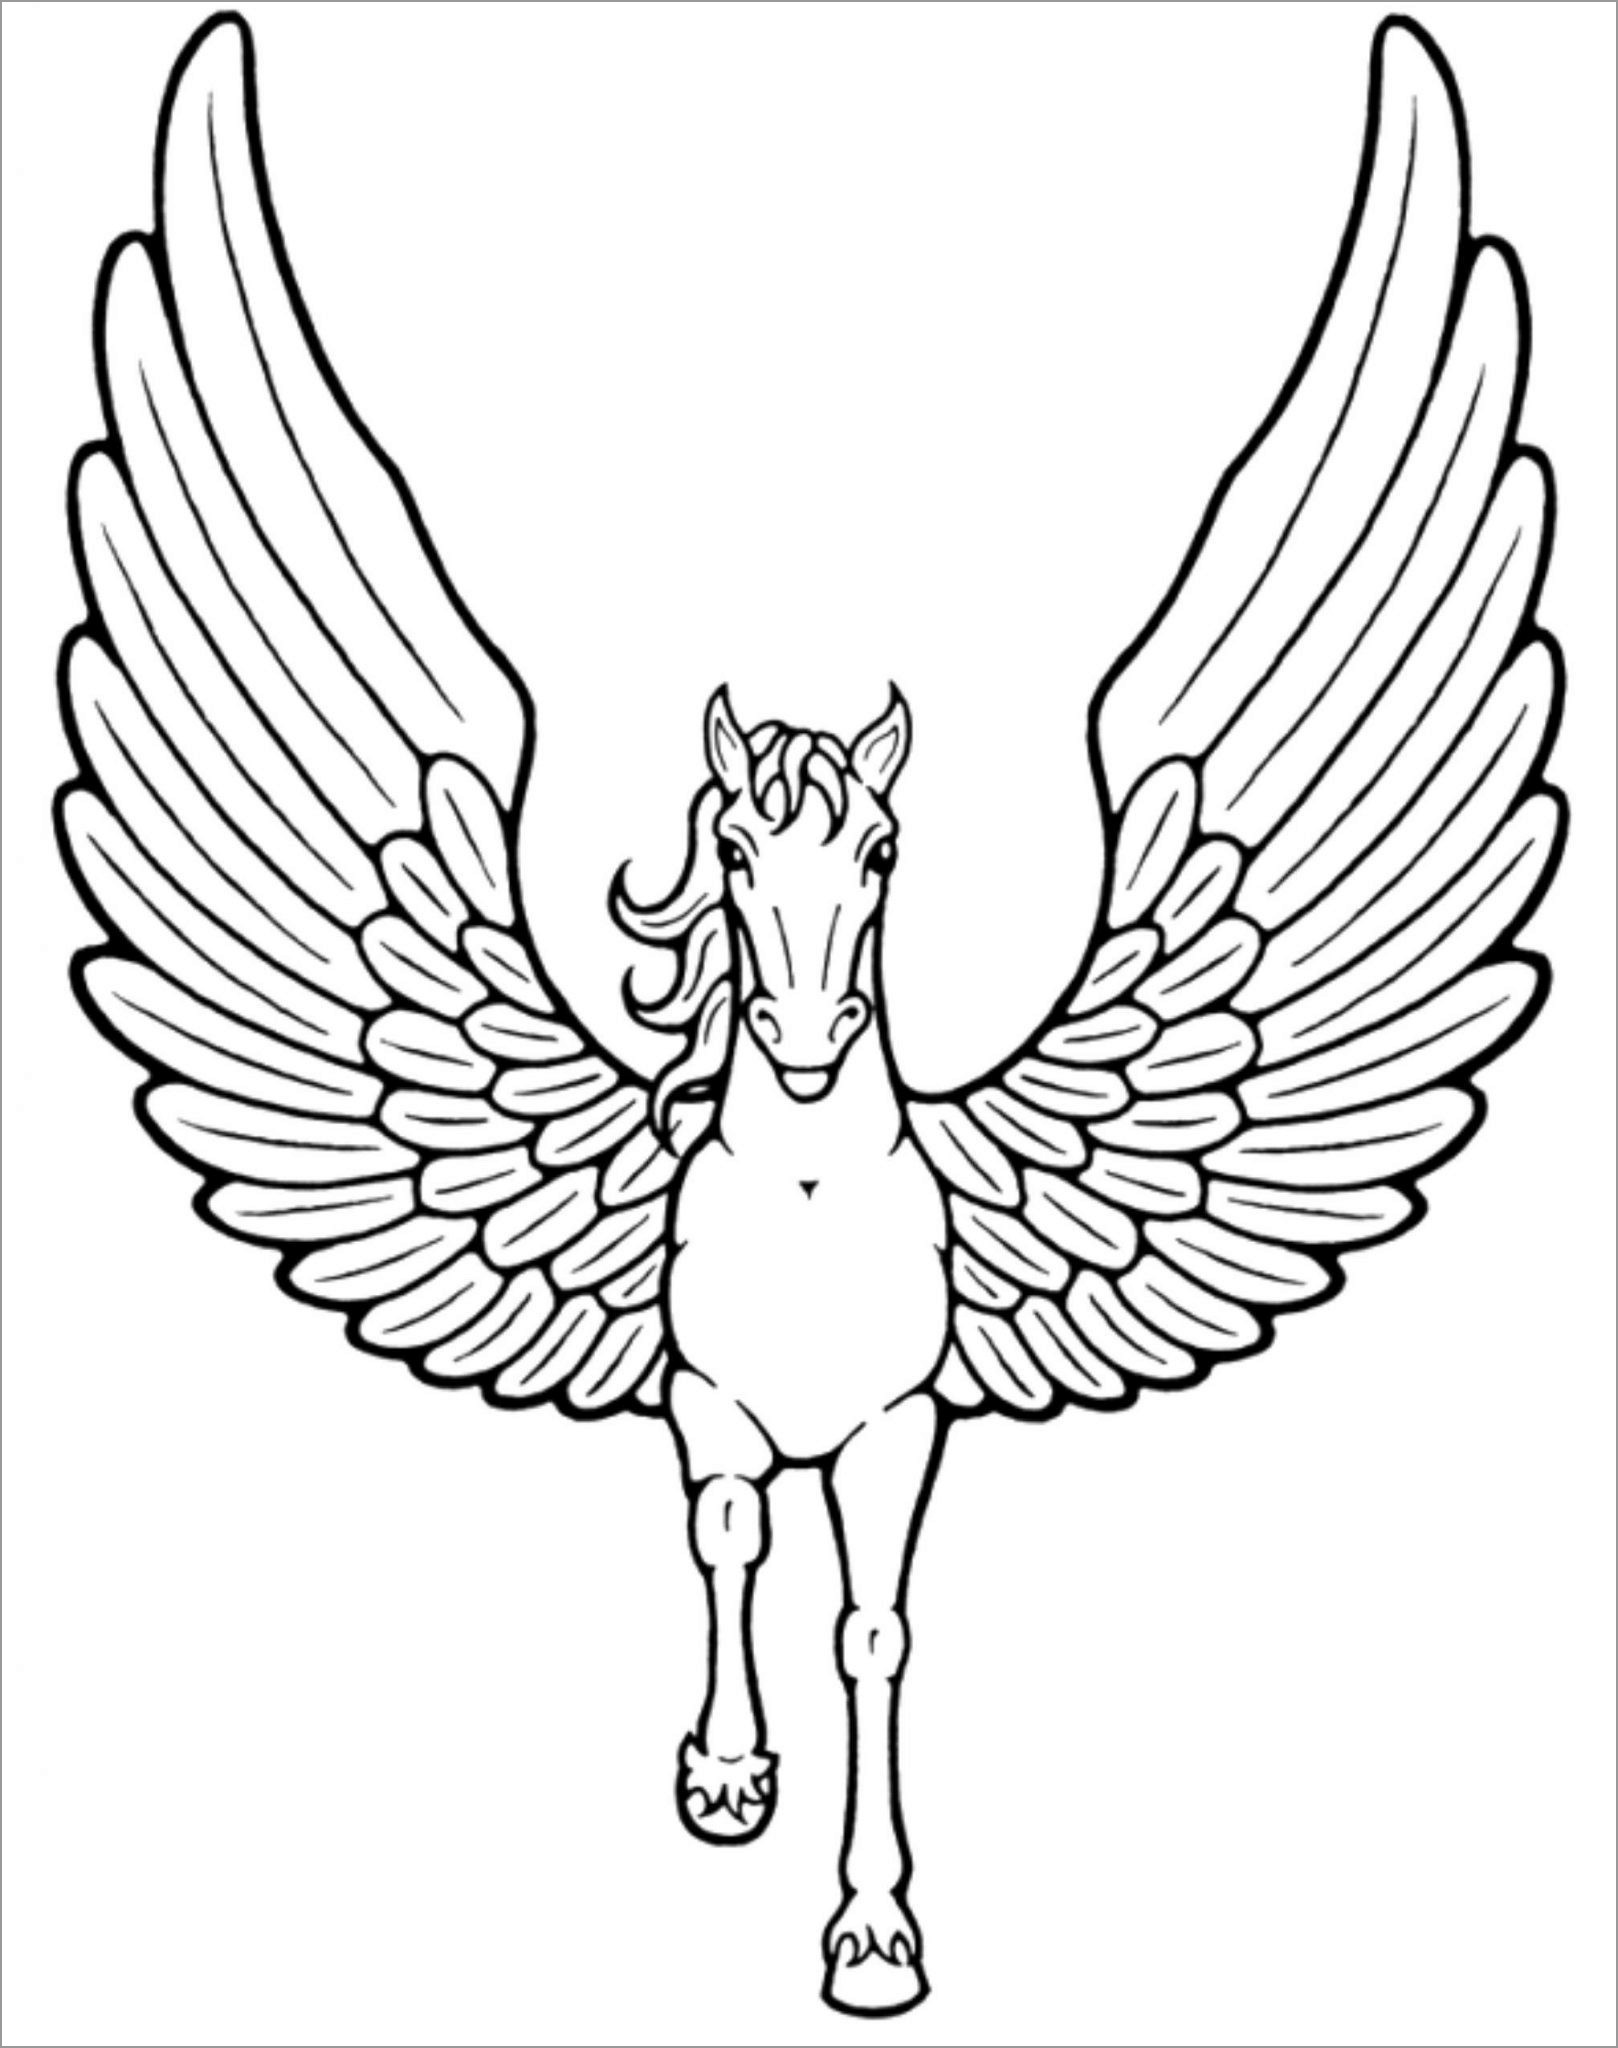 Winged Unicorn Coloring Pages   ColoringBay